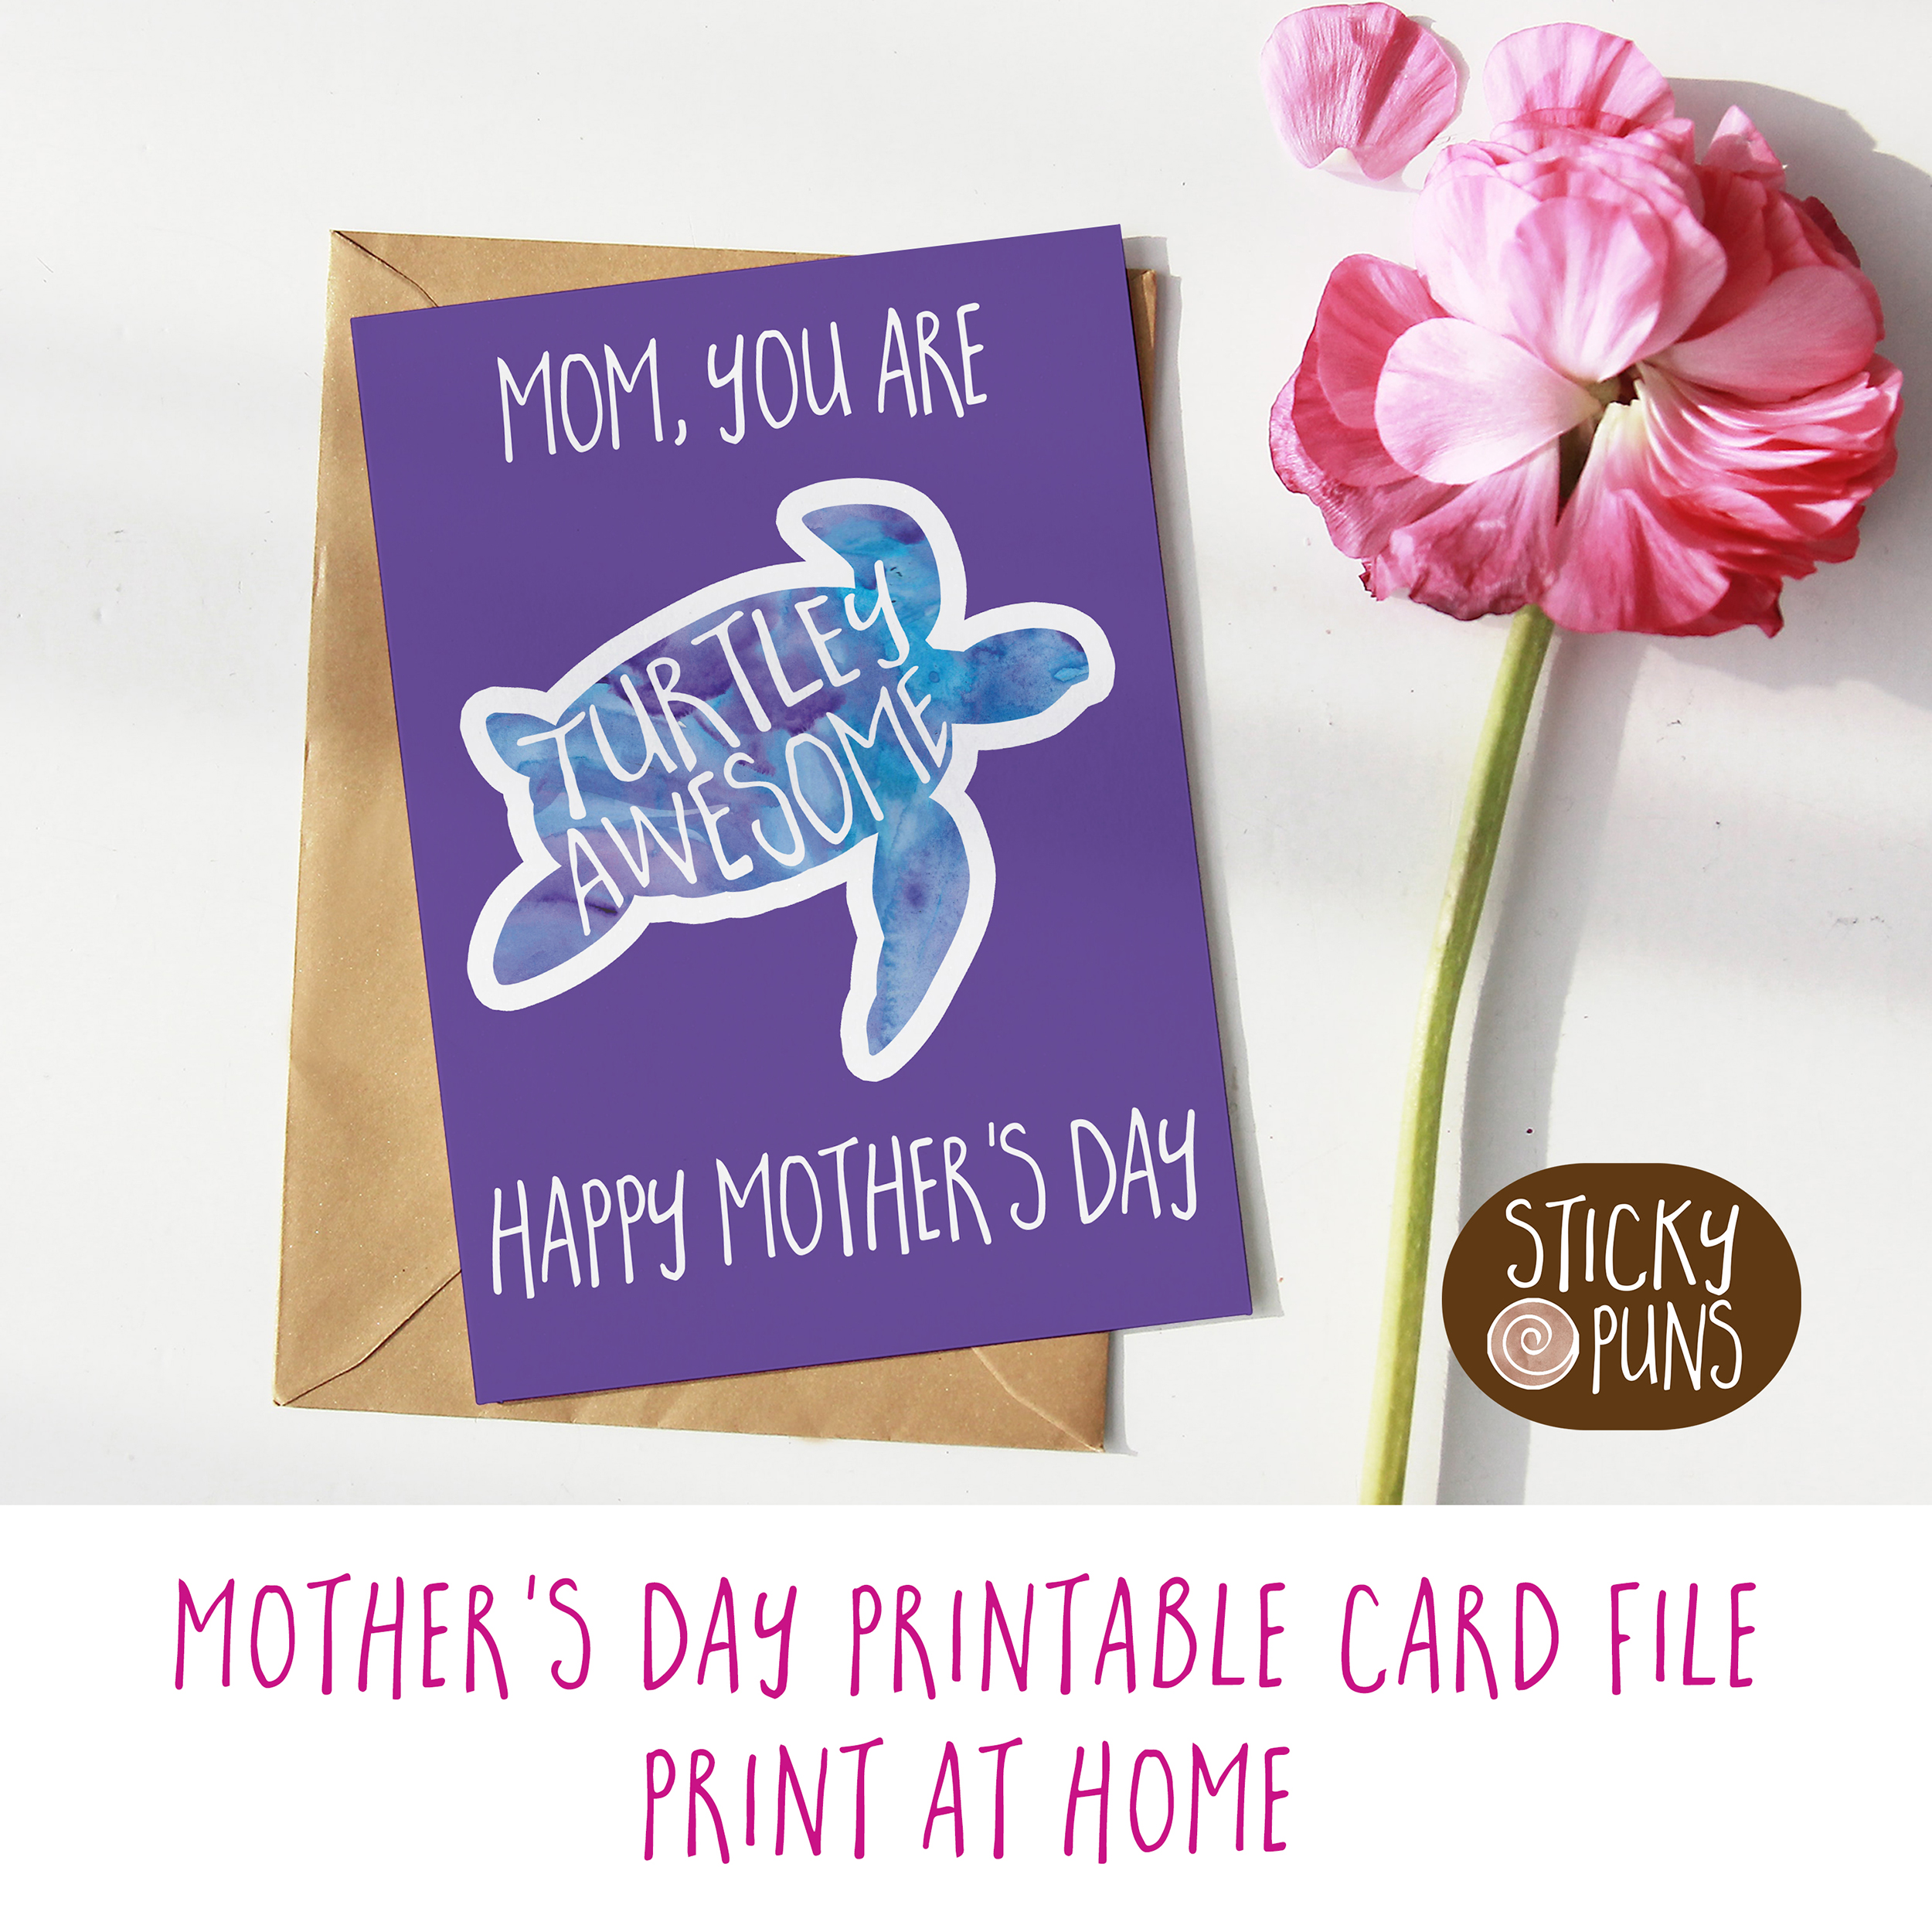 Funny Mother's Day card - TURTLEY awesome - digital file - Shana's Workshop